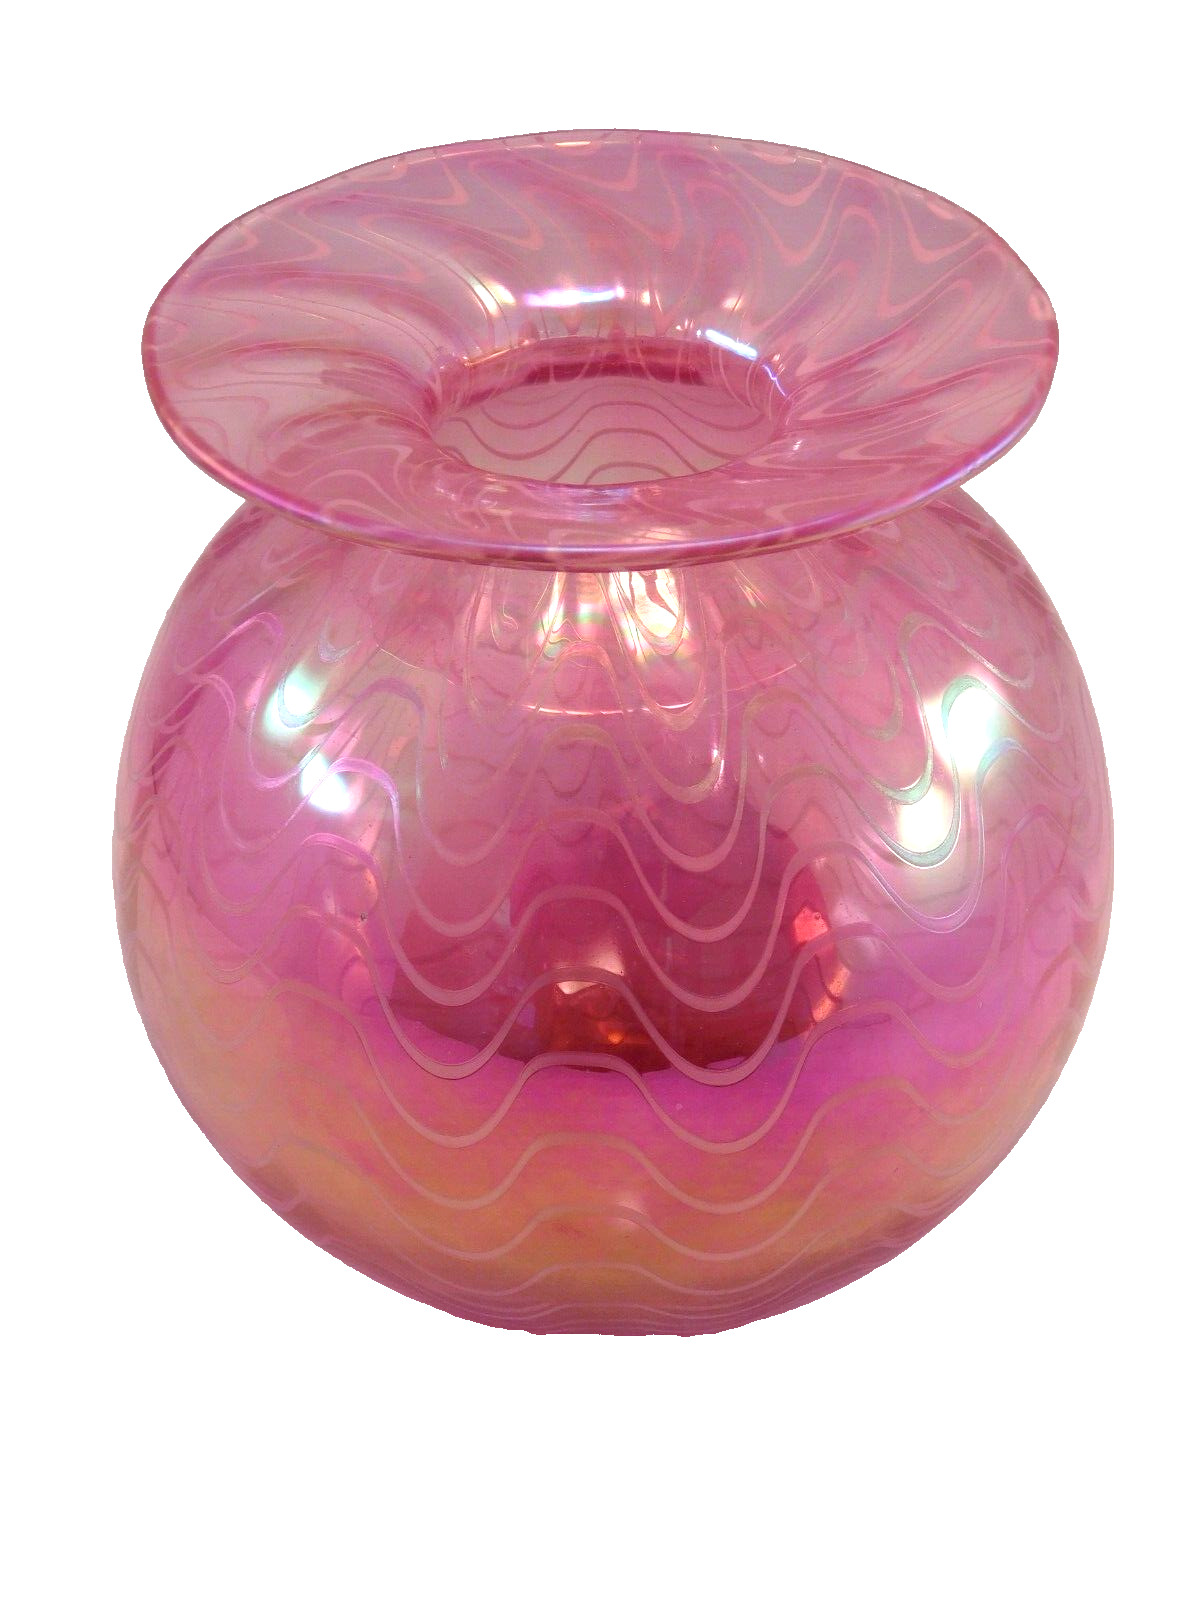 Mount Saint Helens Pink Iridescent Ash Glass Vase by The Glass Eye Studio Signed